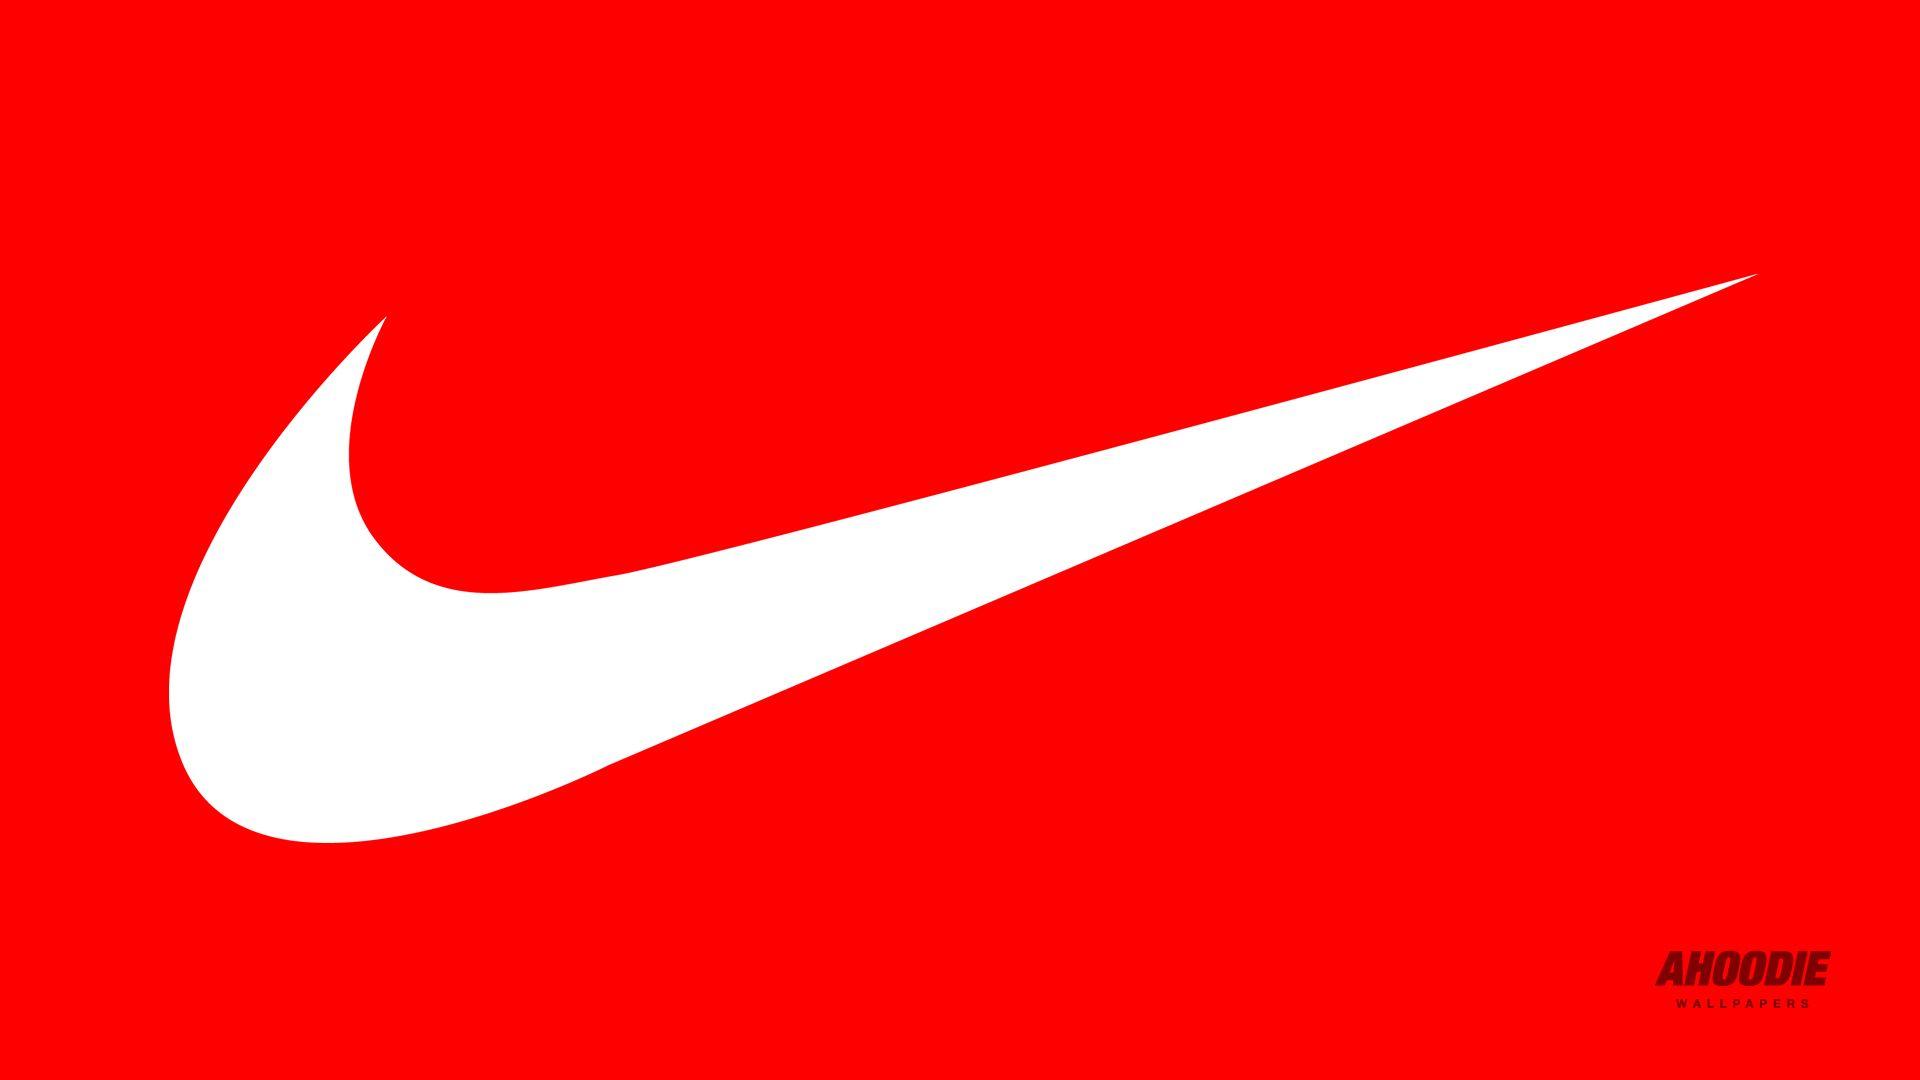 Cool Nike Wallpaper 6215 Wallpaper HD. Hdpictureimages